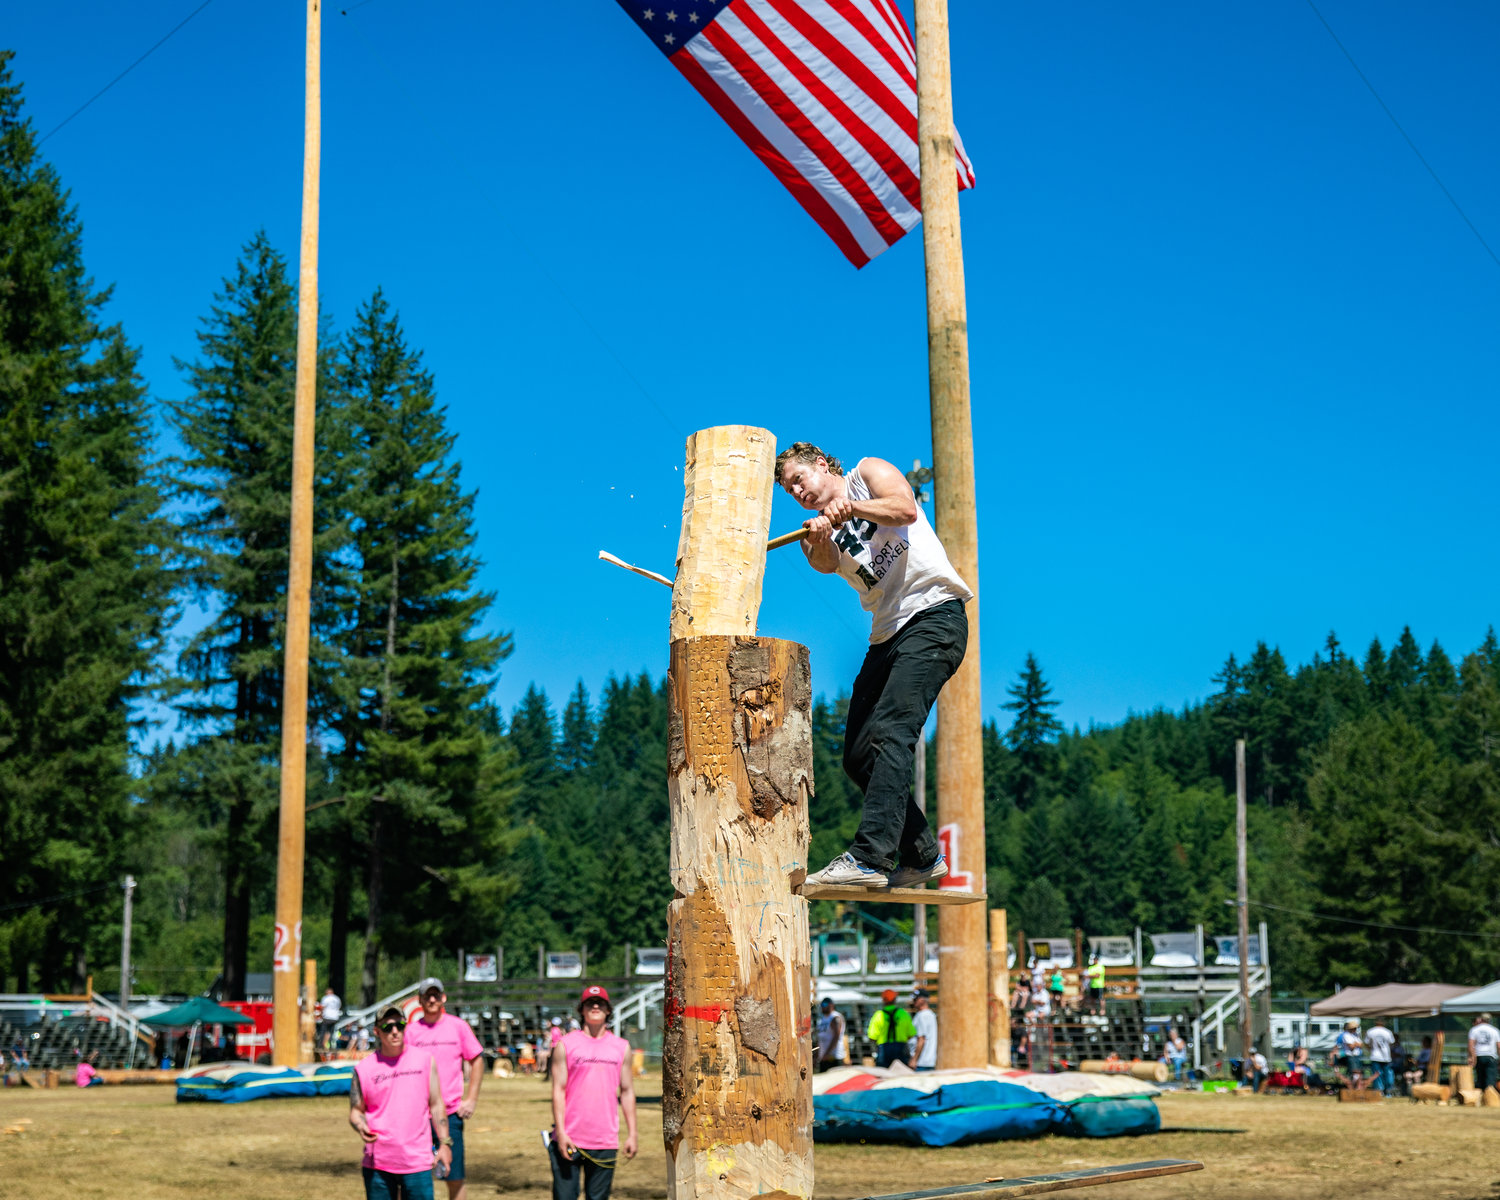 Cassidy Scheer works to split a log while standing atop a spring board during the Morton Loggers’ Jubilee on Sunday afternoon in Morton.